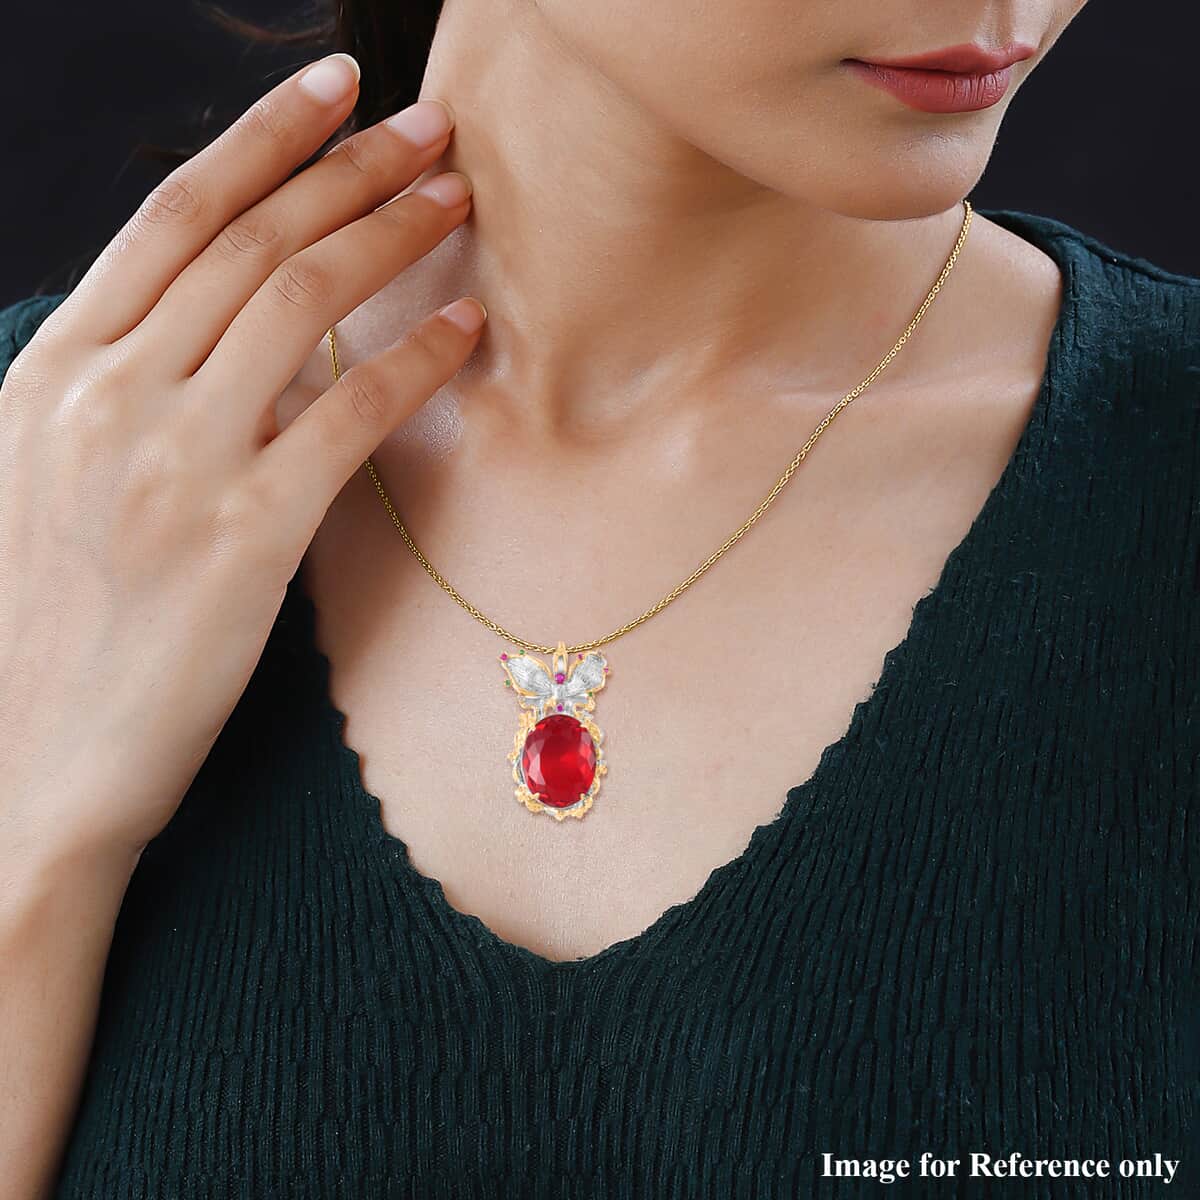 Simulated Ruby, Simulated Multi Color Diamond Pendant Necklace in Goldtone and ION Plated YG Stainless Steel 20 Inches, Tarnish-Free, Waterproof, Sweat Proof Jewelry image number 2